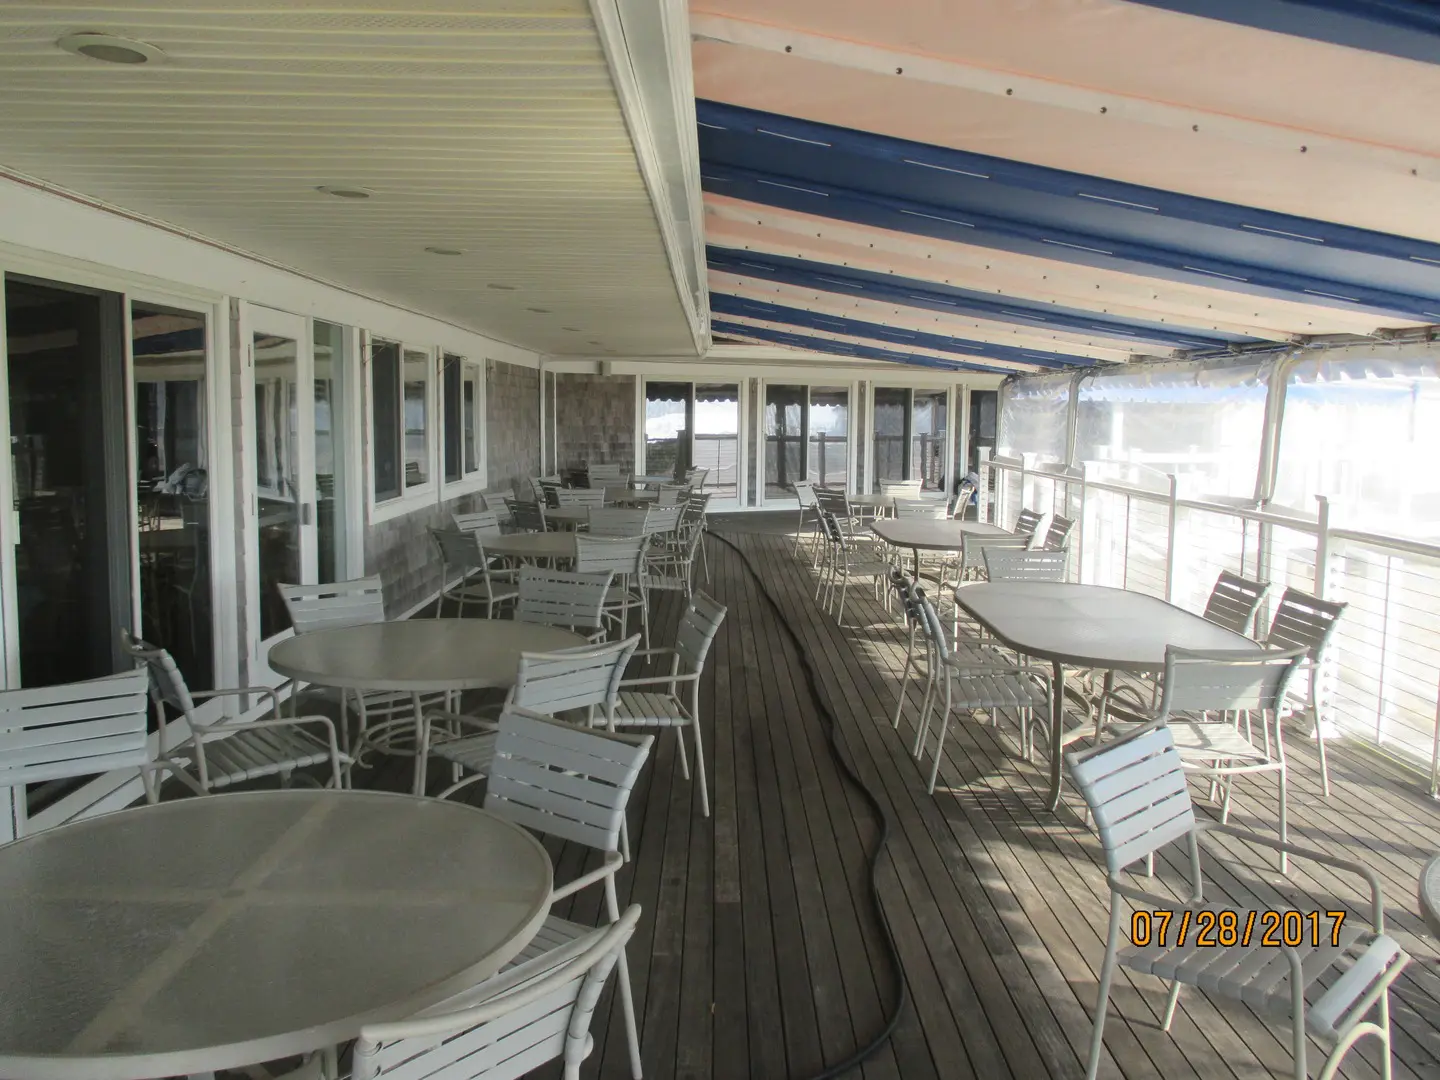 A large deck with tables and chairs on it